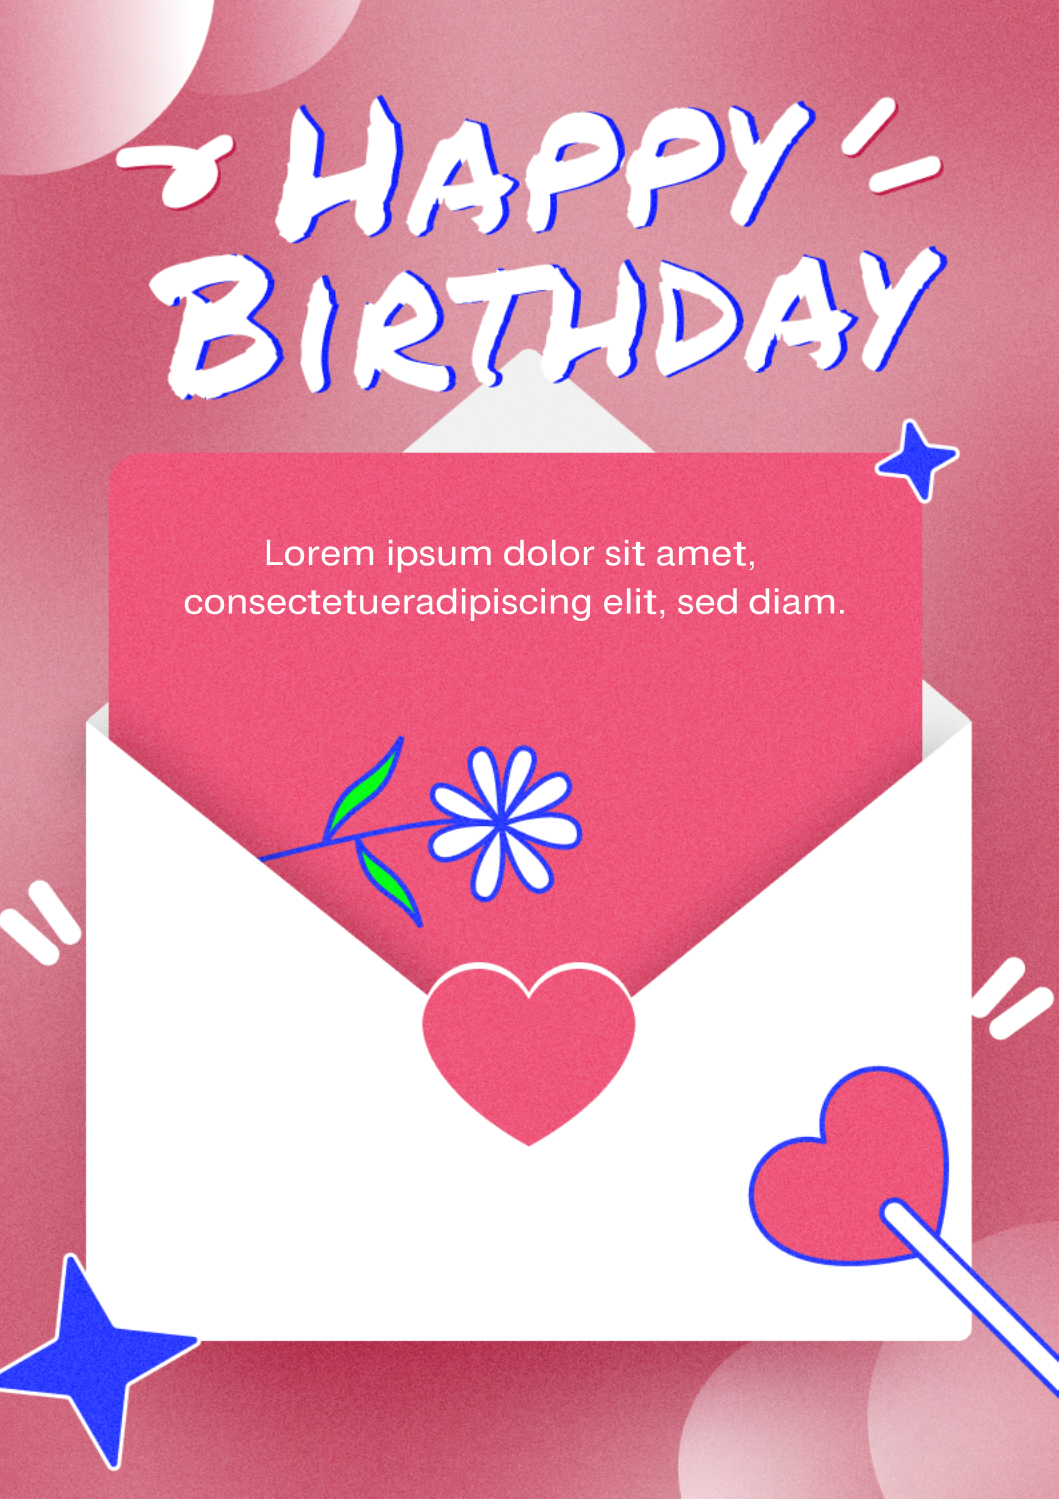 Birthday wishes card for baby boy